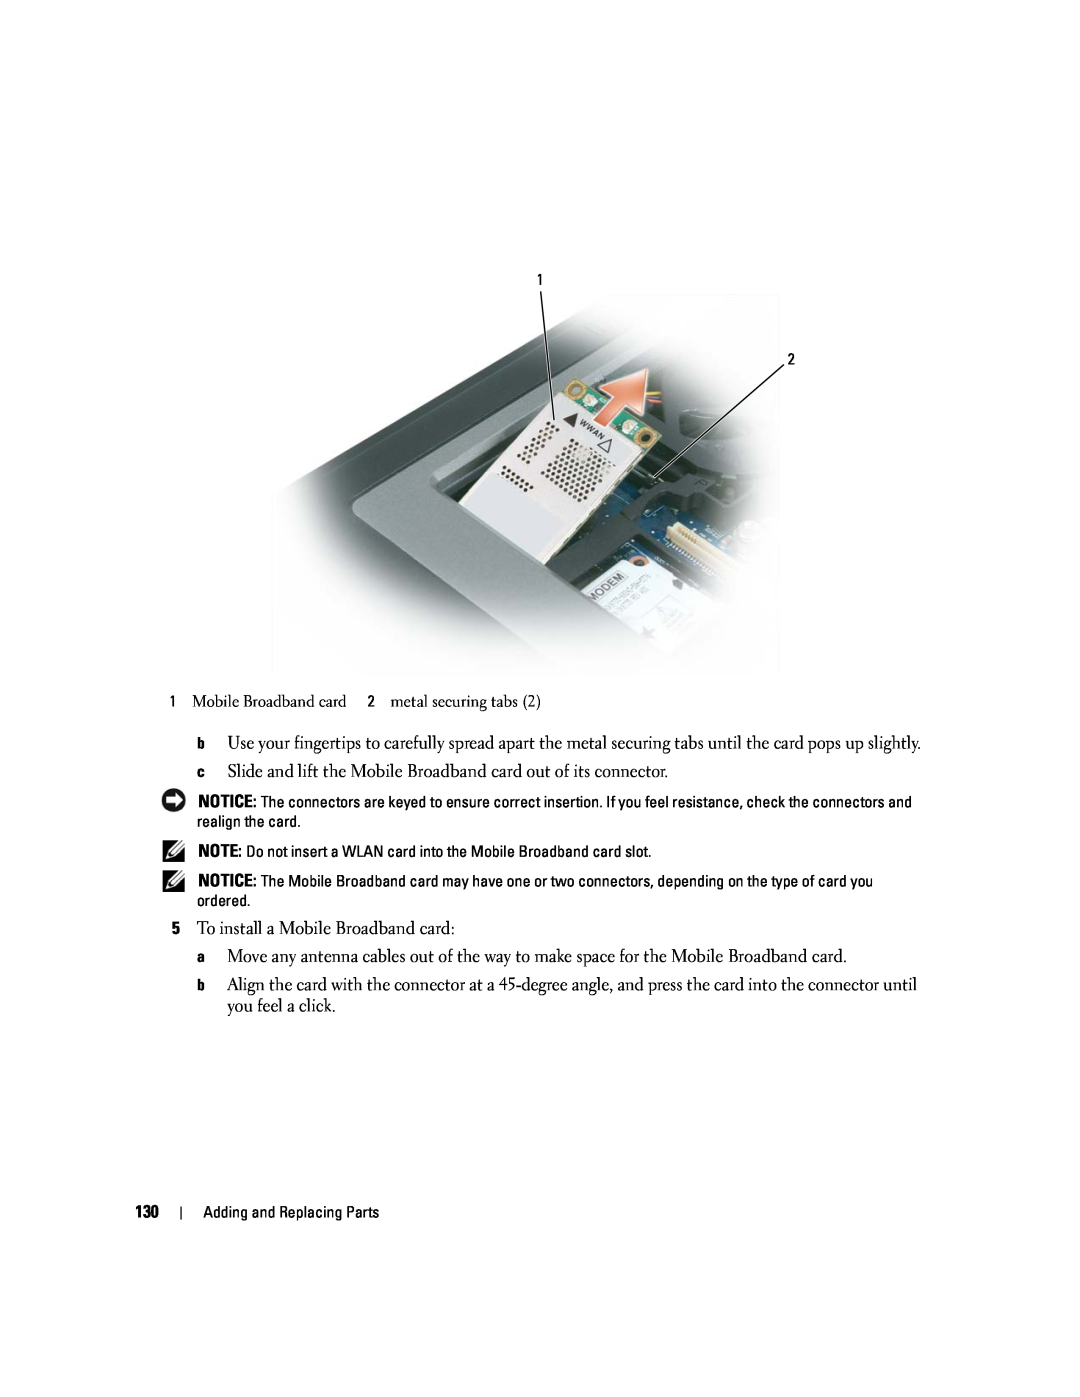 Dell PP24L manual c Slide and lift the Mobile Broadband card out of its connector 